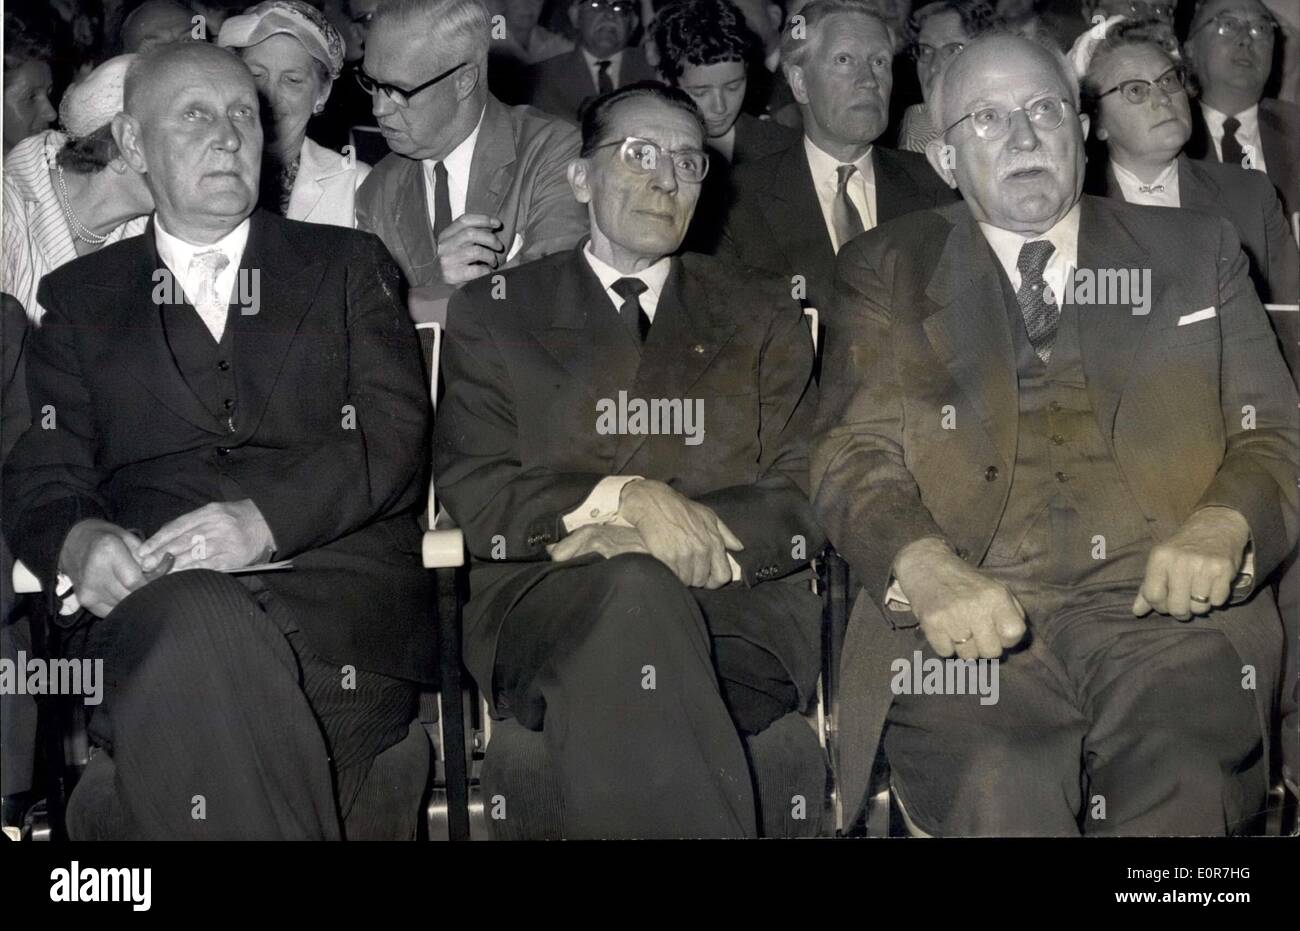 Jul. 02, 1958 - 8th Nobel prize winners assembly at Lindau On July 1, 1958 at Lindau, Bodensee, the 8th assembly of the Nobel prize winners was beginning, 14 members were taking part. Our picture shows from left to right side: Professor Dr. Domagk, Wuppertal, behind him Professor Dr. Todd, Cambridge, England, first line Professor Joliot-Curie, Paris, France and Professor Dr. Staudinger, Fribourg, Germany. Stock Photo